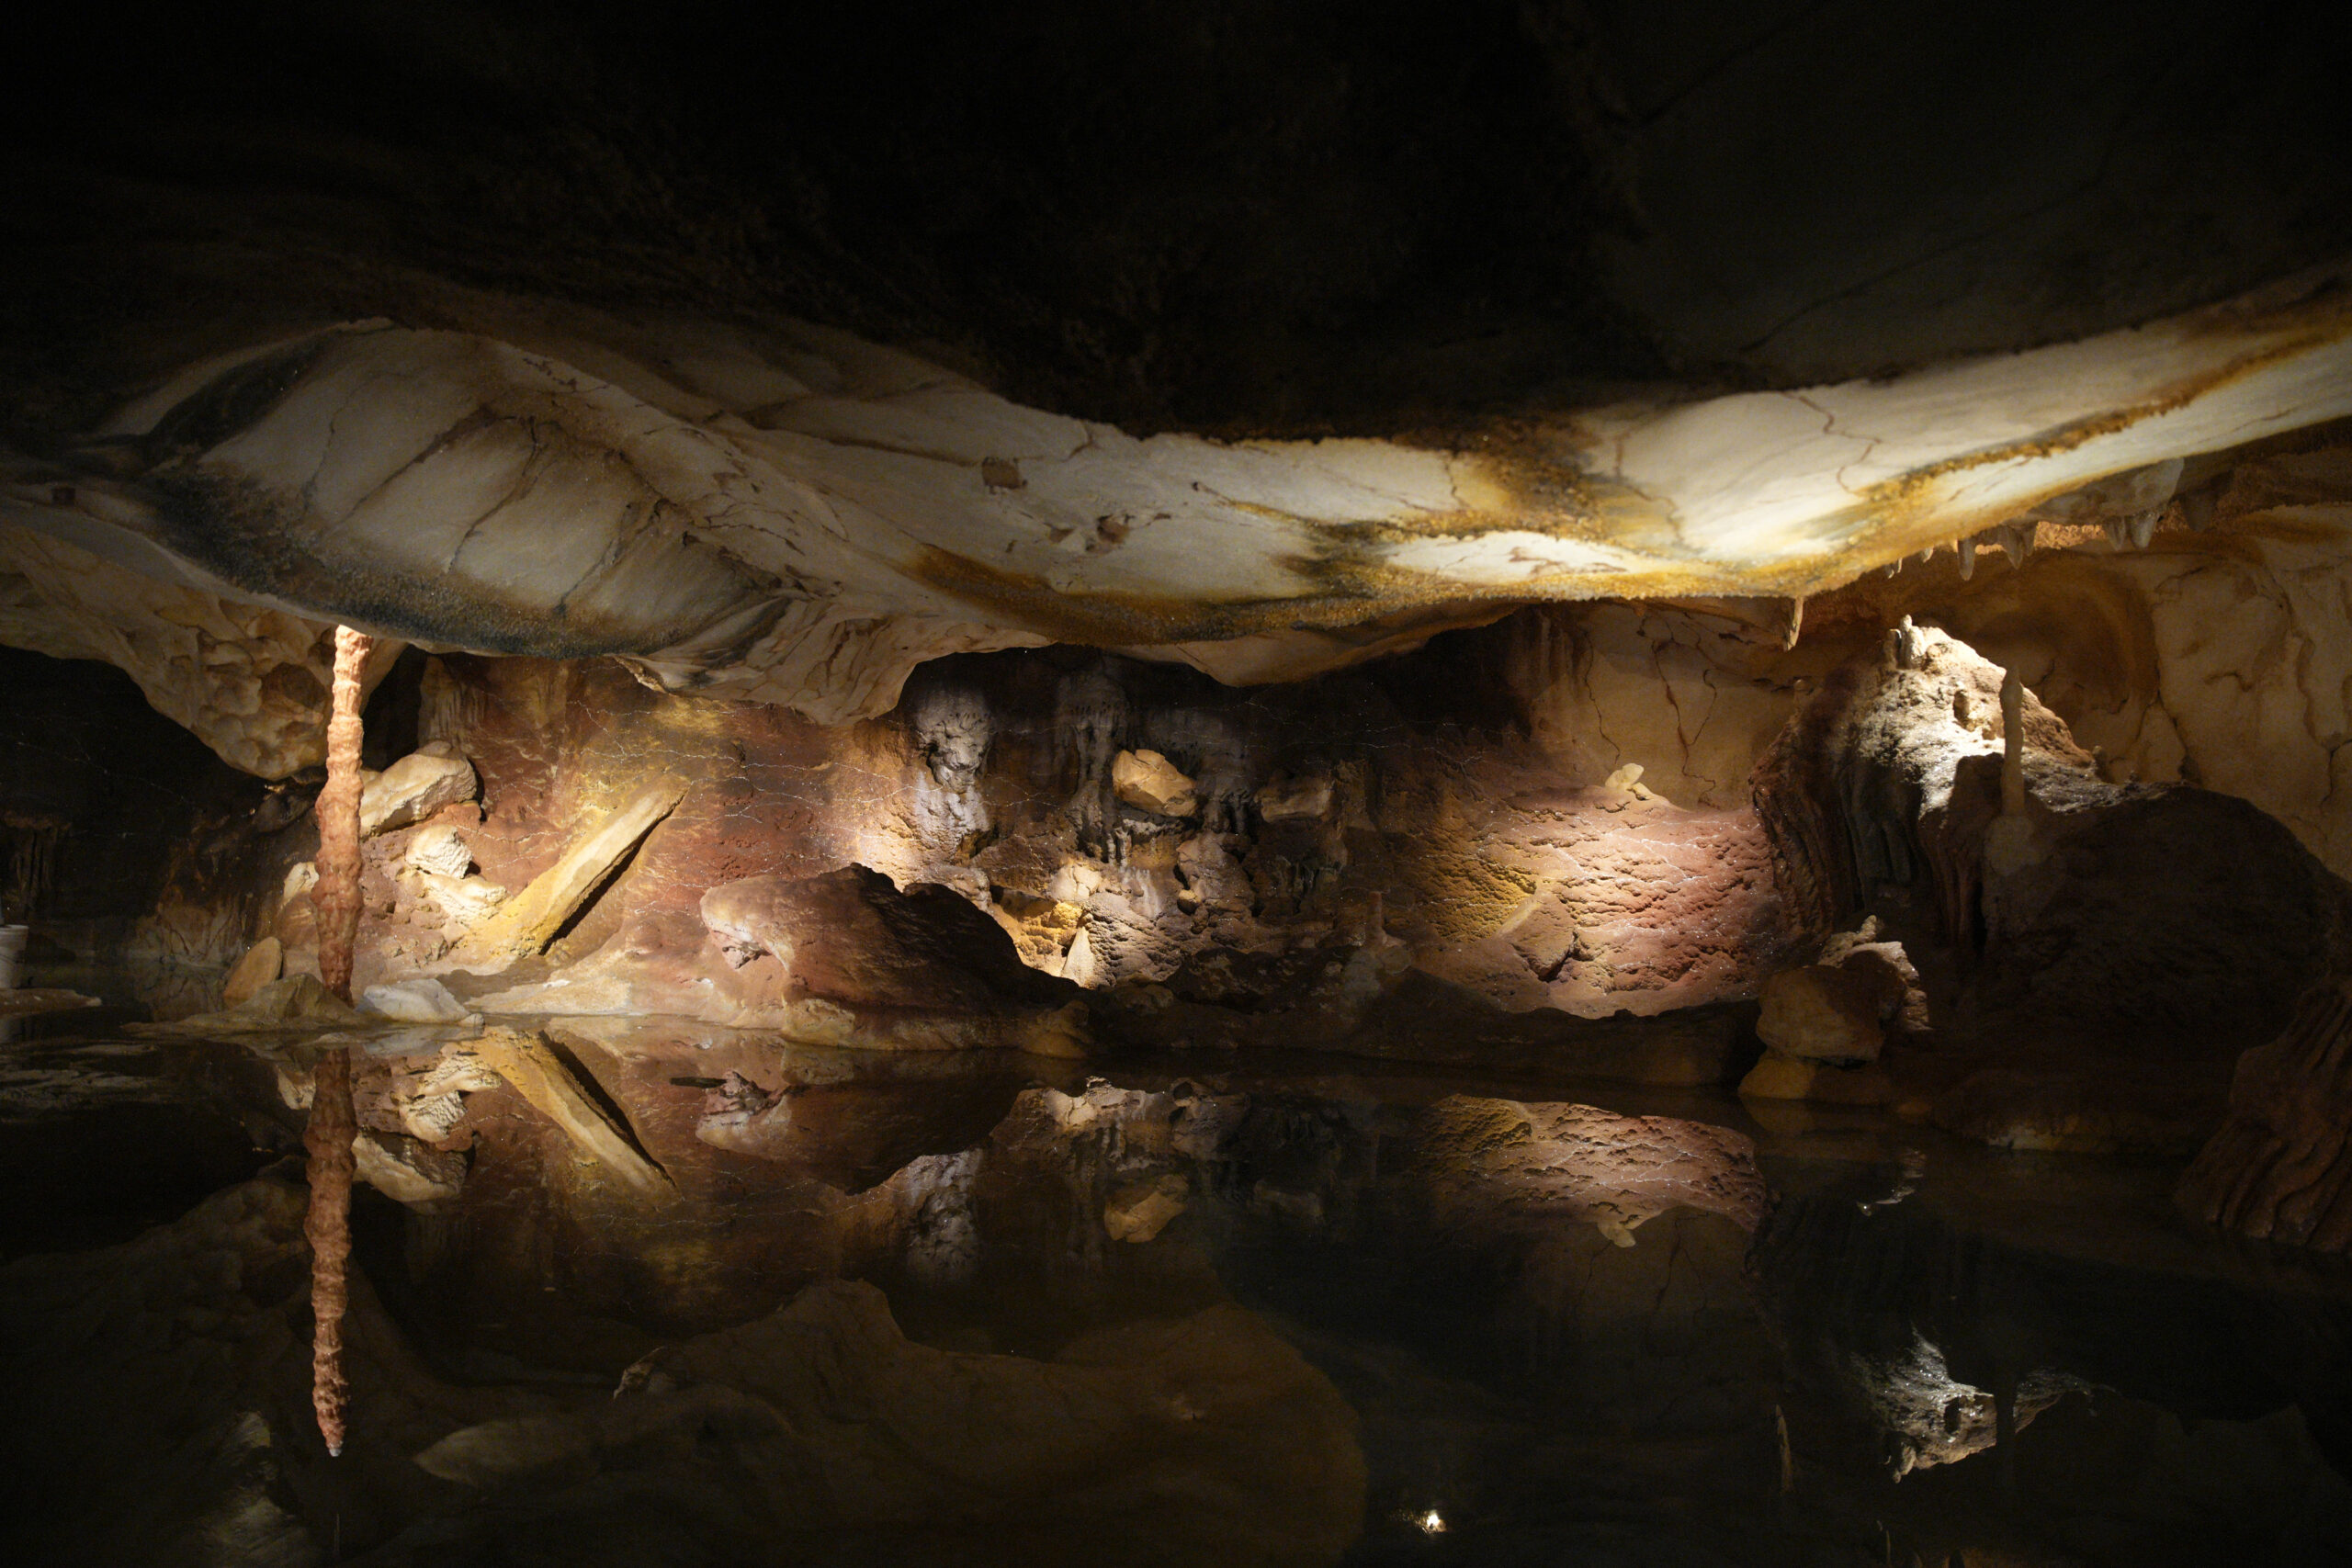 A replica of the Cosquer Cave in the Villa Mediterranee is pictured in Marseille, southern France, Thursday, June 2, 2022. From Saturday June 4 2022, in the port city of Marseille, visitors will be able to see a replica of the over 30,000-year old site with copies of the prehistoric paintings that made the cave internationally famous. The Cosquer Cave was discovered in 1985 by diver Henri Cosquer, nestled deep in the sea under the Marseille coastline. (AP Photo/Daniel Cole)